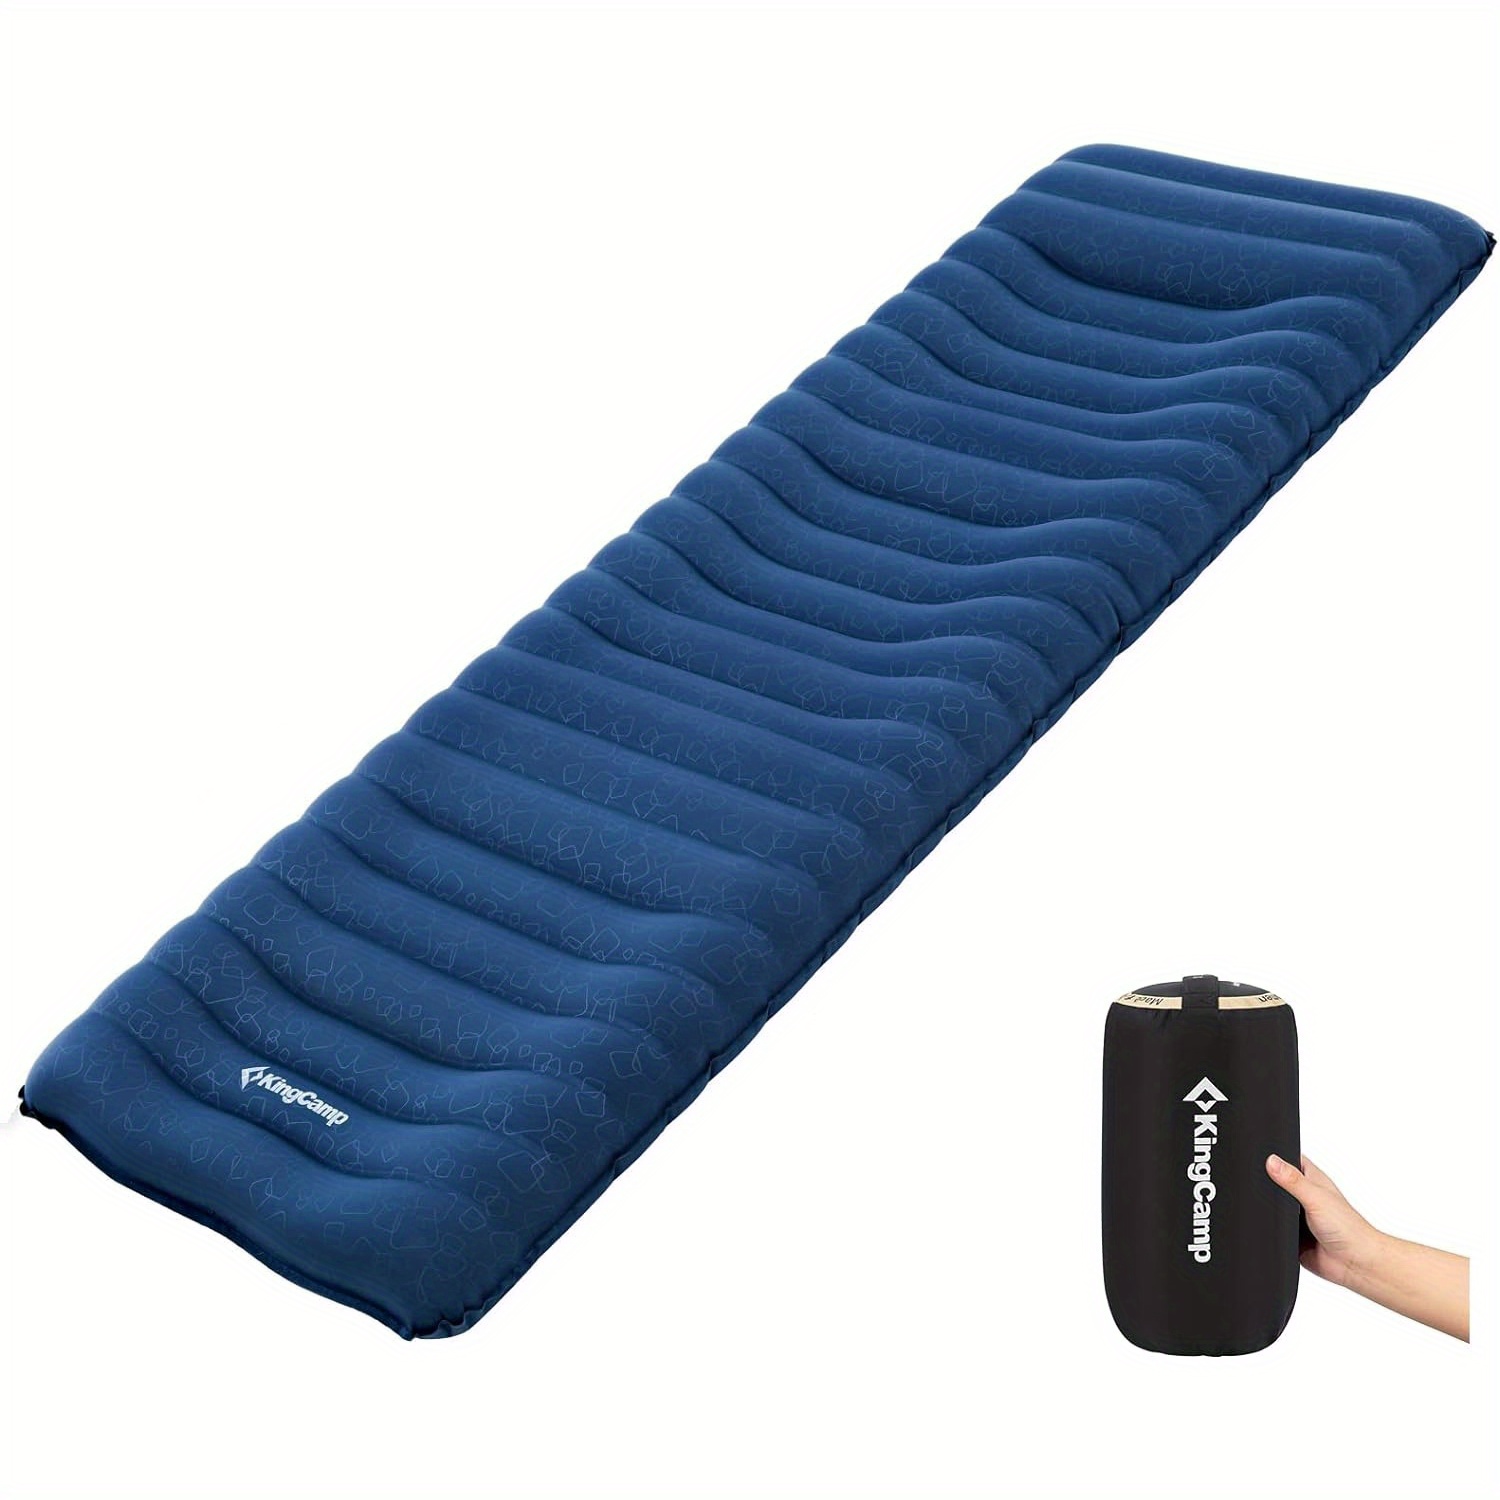 

Kingcamp Camping Mattress, Inflatable Ultralight Air Cushion, Ergonomic Design, Built-in Pillow, 4 Inches (about 10.2cm), Suitable For Backpacking And Hiking